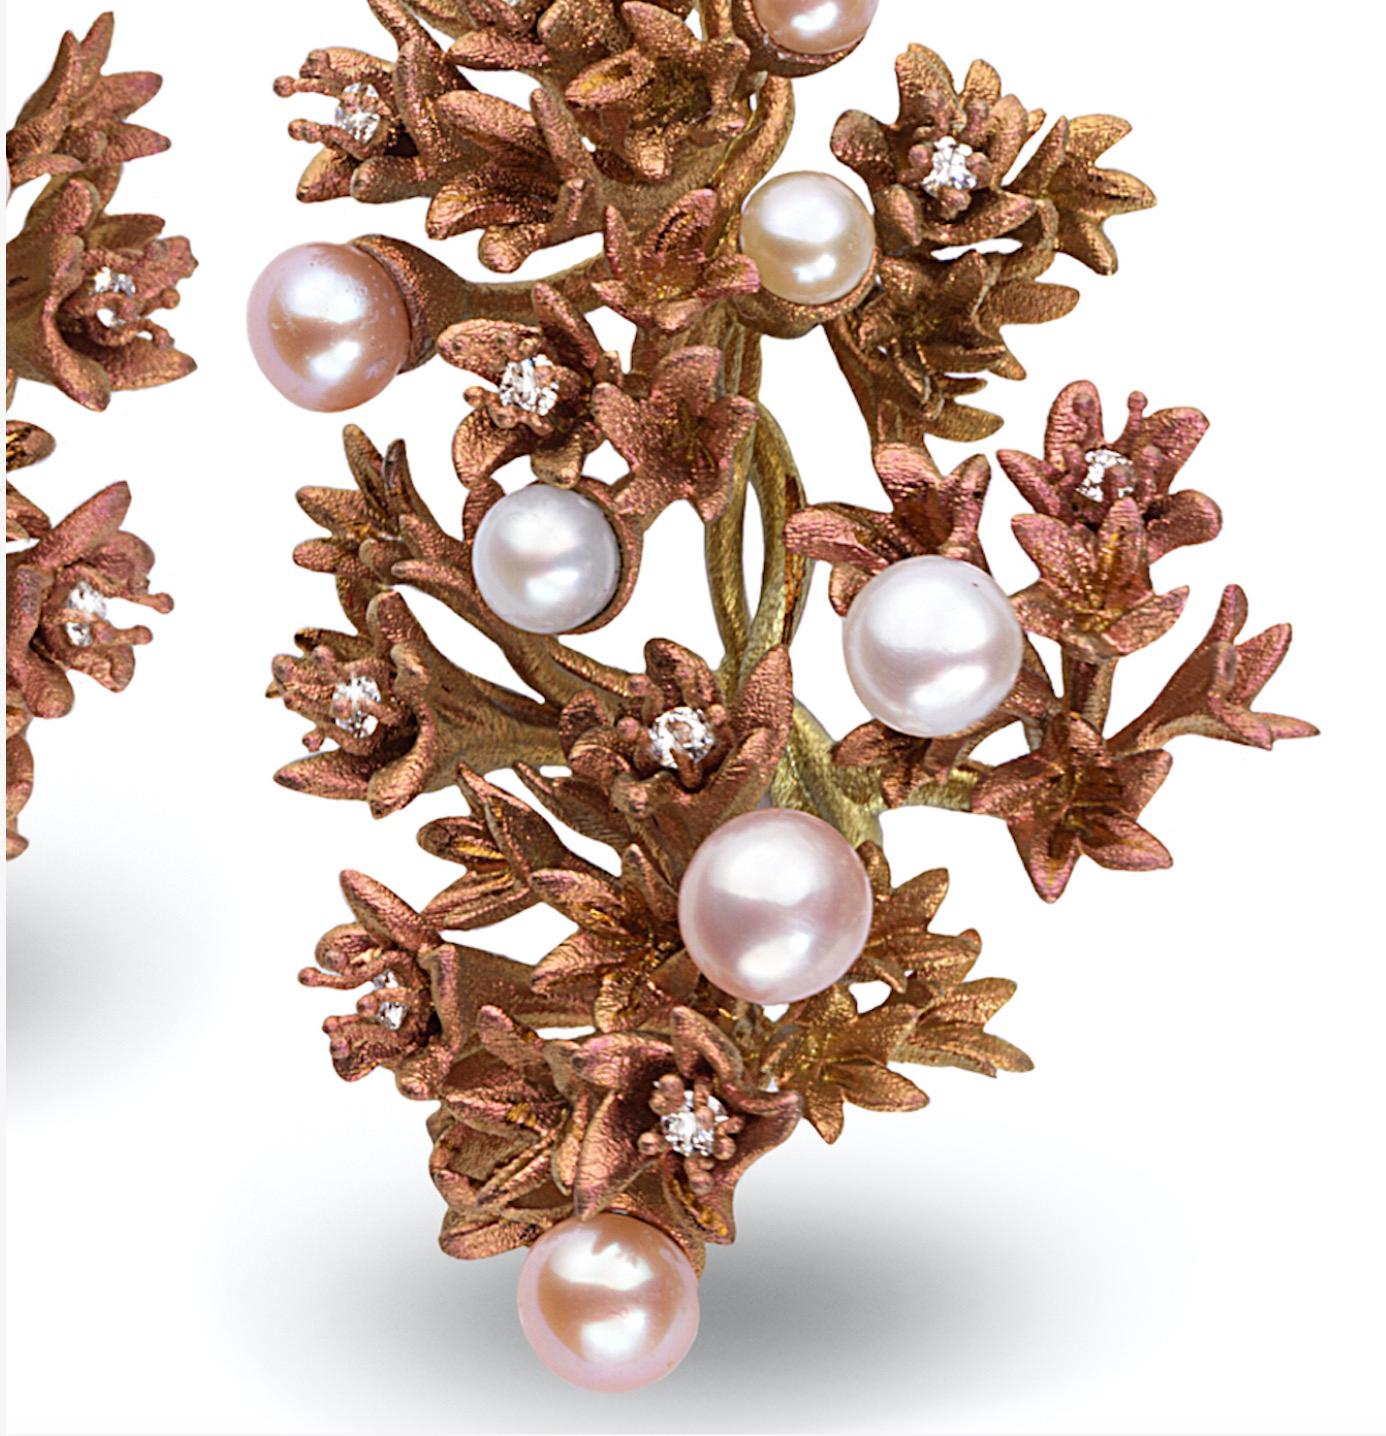 A pair of modern Fiorella earrings by Neha Dani. These titanium earrings are comprised of two significant hanging bouquets of delicately twisting and unfurling bronze-colored blooms, interspersed with 18 freshwater pearls and 20 round-cut diamonds